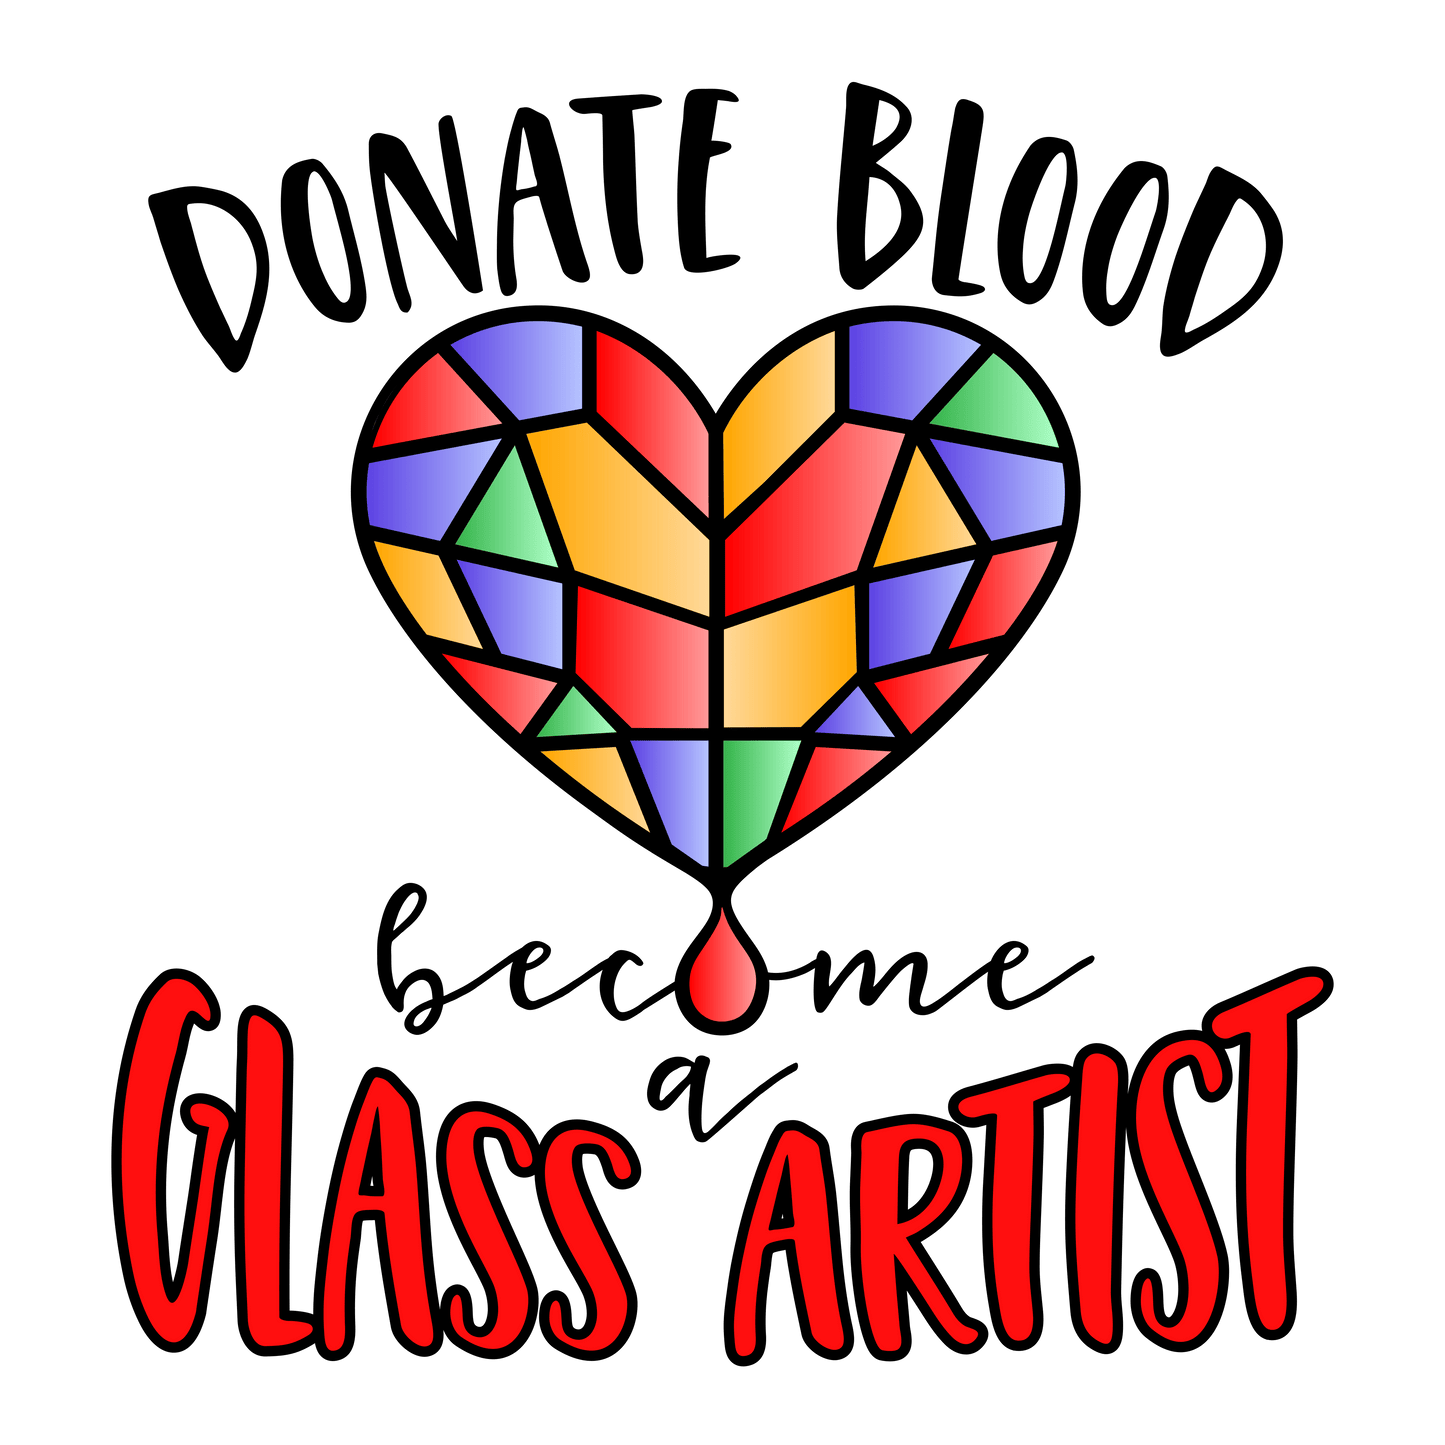 Fuse Muse Fused Glass Apparel, Etc... Donate Blood Become a Glass Artist - White Short-Sleeve Unisex T-Shirt